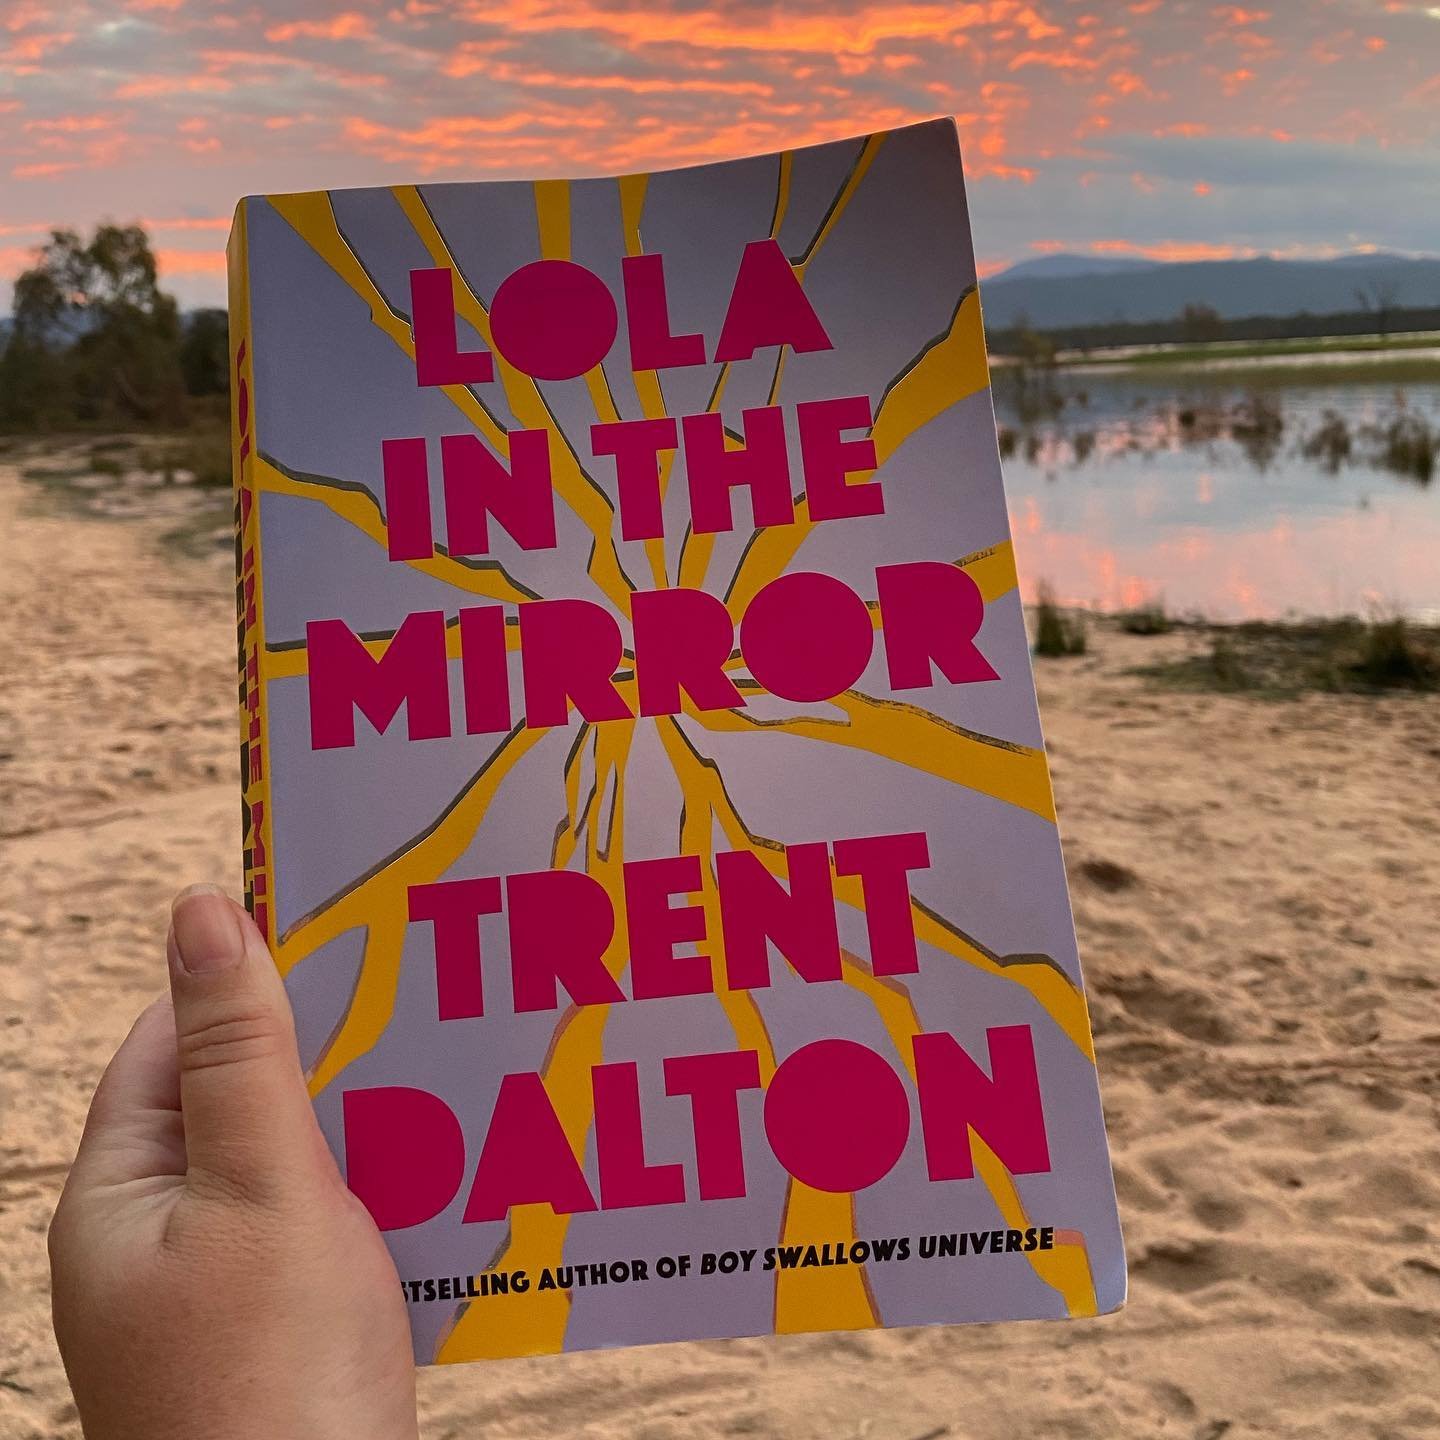 This book. 

Wow. 

Wow, wow, wow!

I have a confession, I haven&rsquo;t understood what all the fuss was about with Trent Dalton. I enjoyed Boy Swallows Universe but no more than any other fabulous - and less celebrated - book that I&rsquo;ve read. 